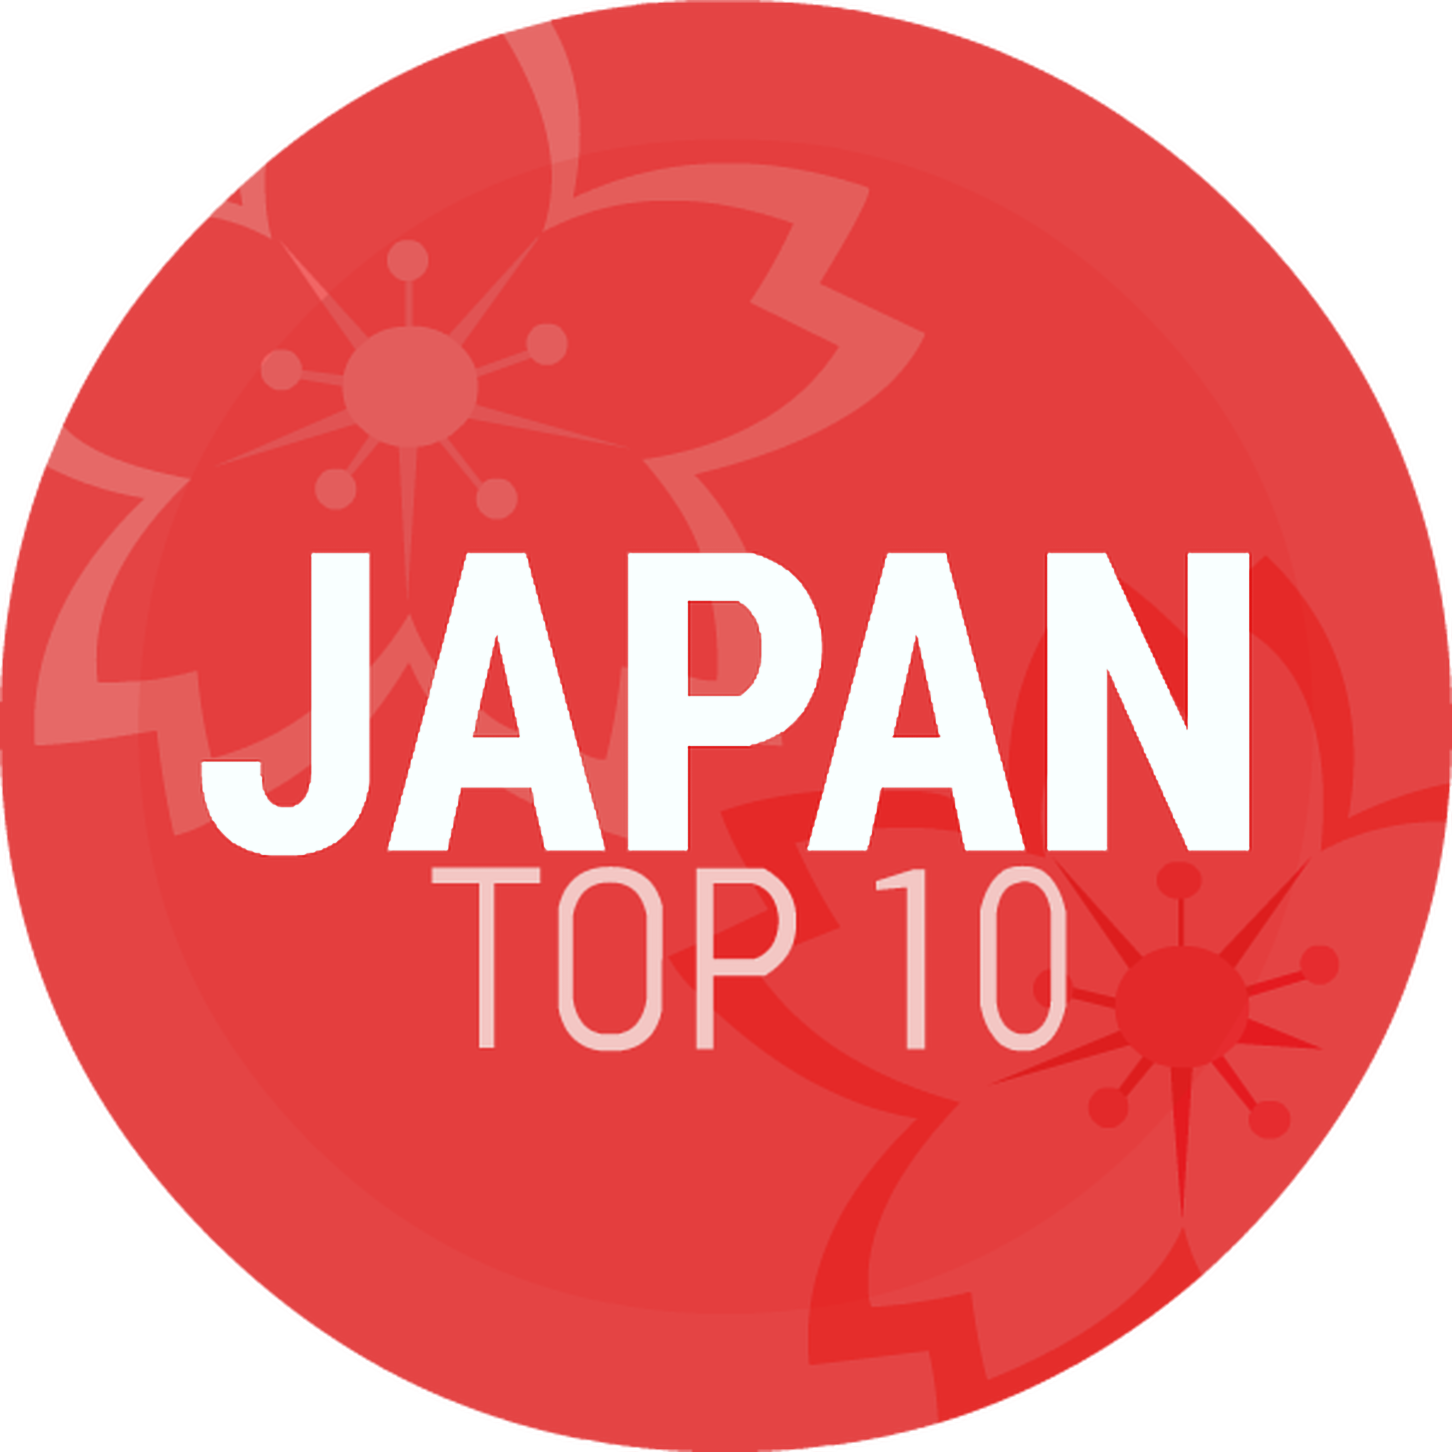 Episode 183: Japan Top 10 Summer Special #1 - My Favorite Anime Song